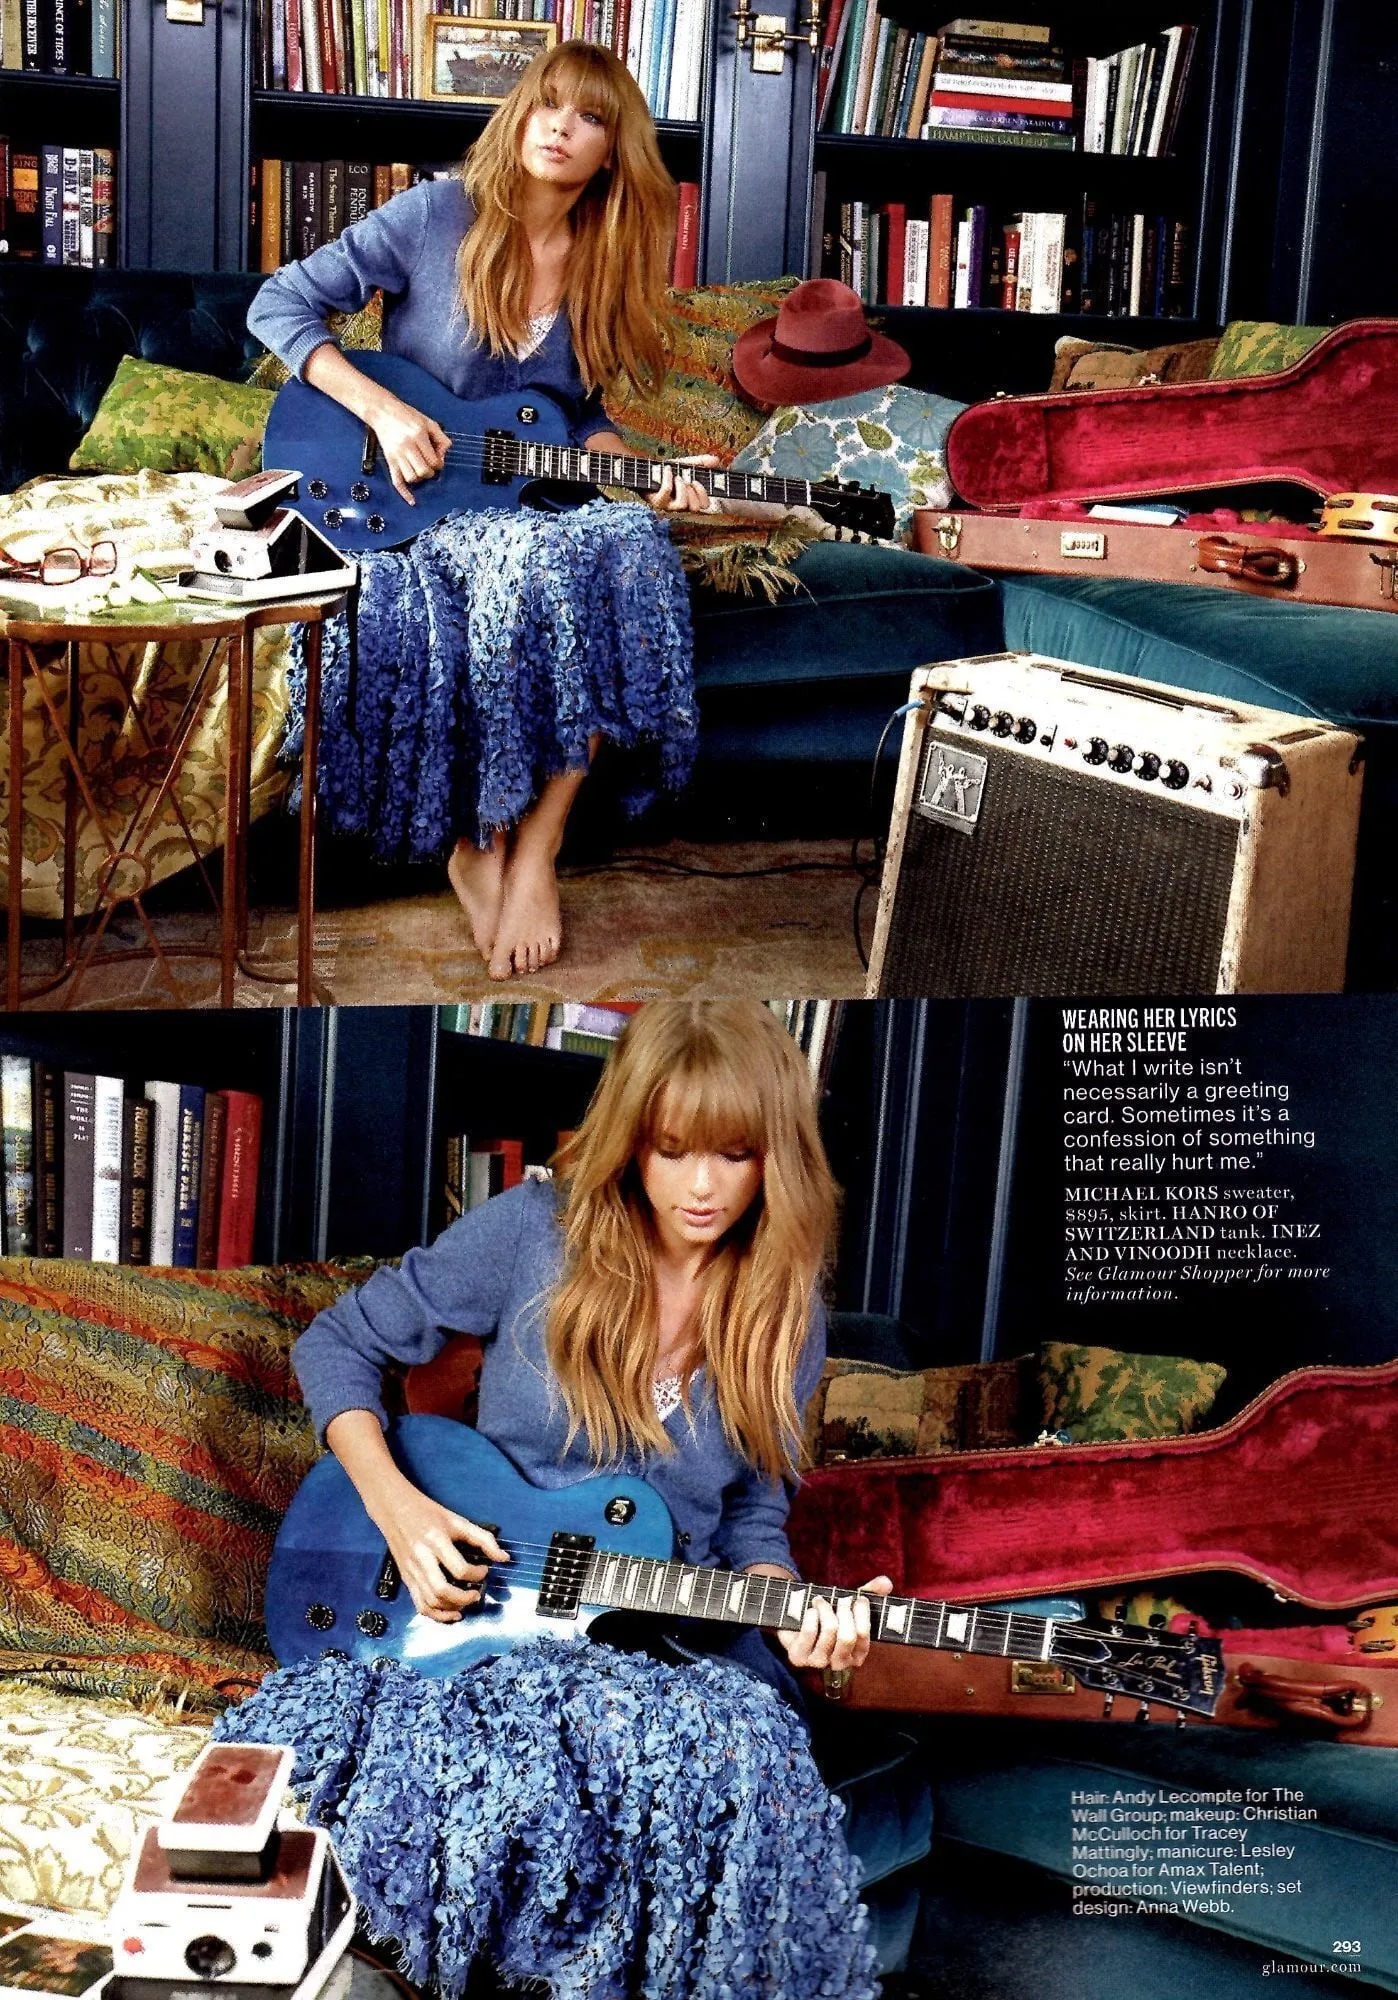 Gibson Les Paul Studio Lite guitar used in Taylor Swift photo shoot, estimated at $8,000-$12,000 at Julien's.